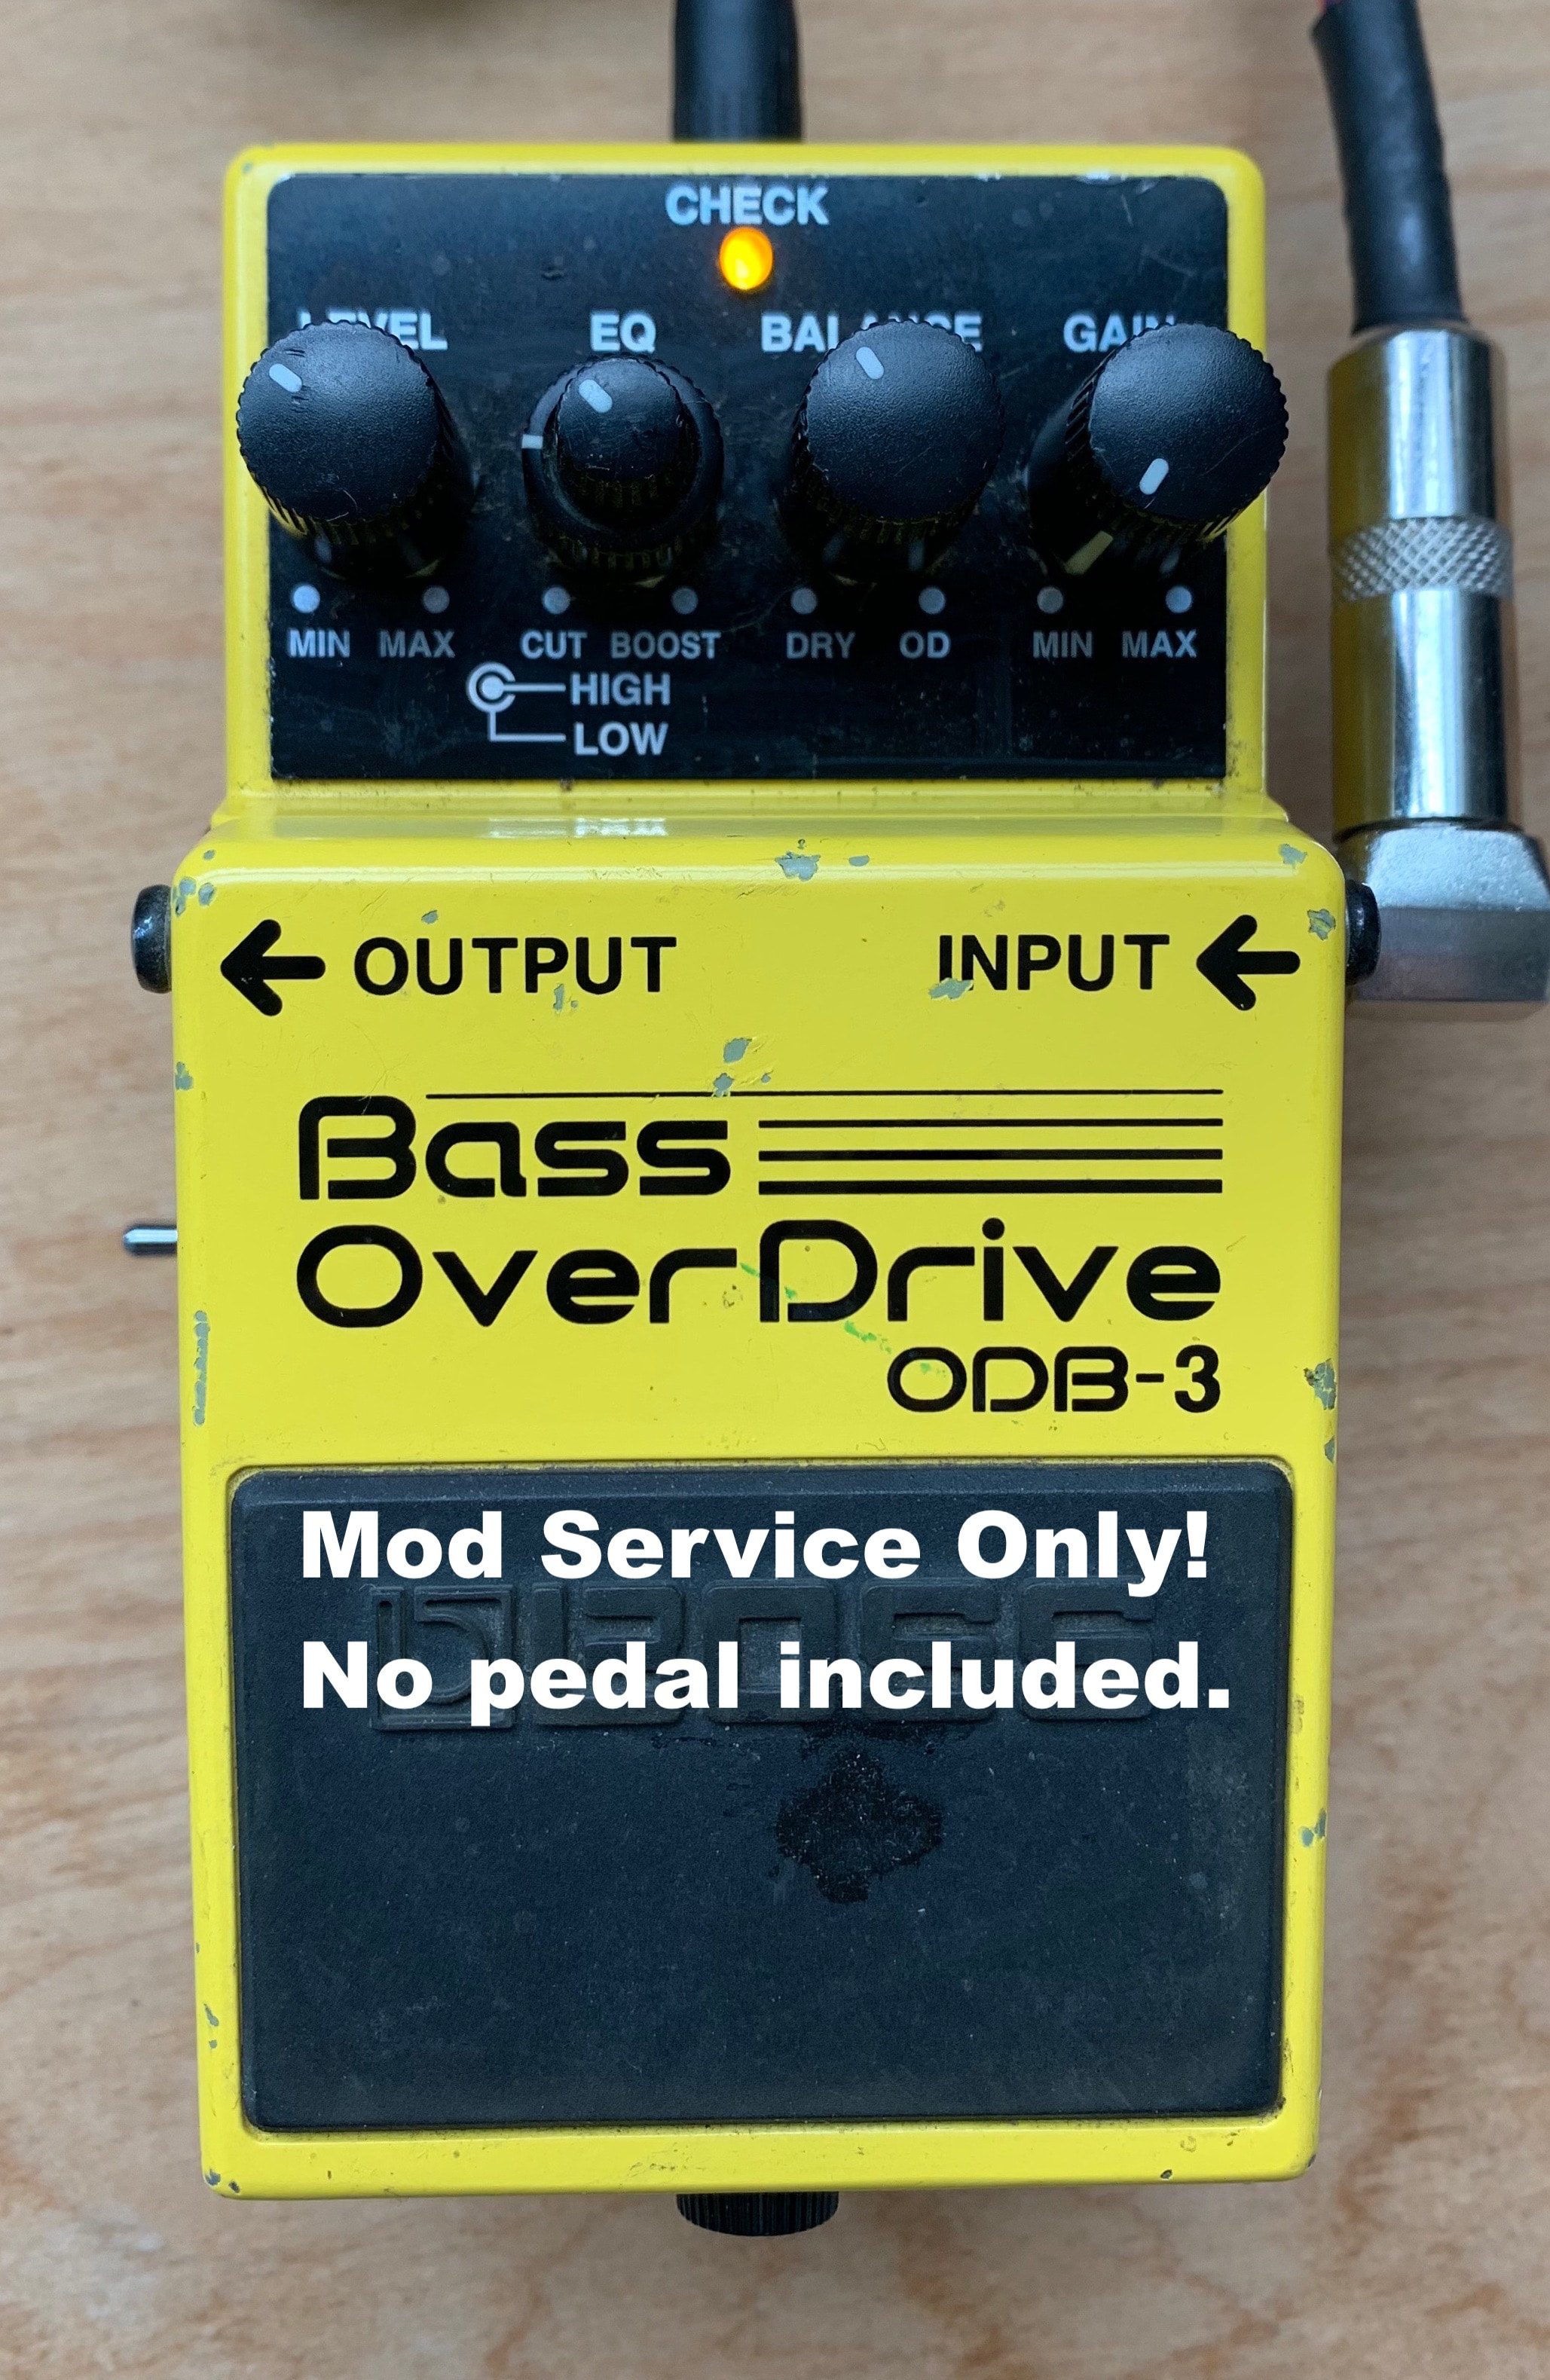 Banke Dare selvbiografi Modify your Boss ODB-3 Bass Overdrive with upgrades! Mod service Only!